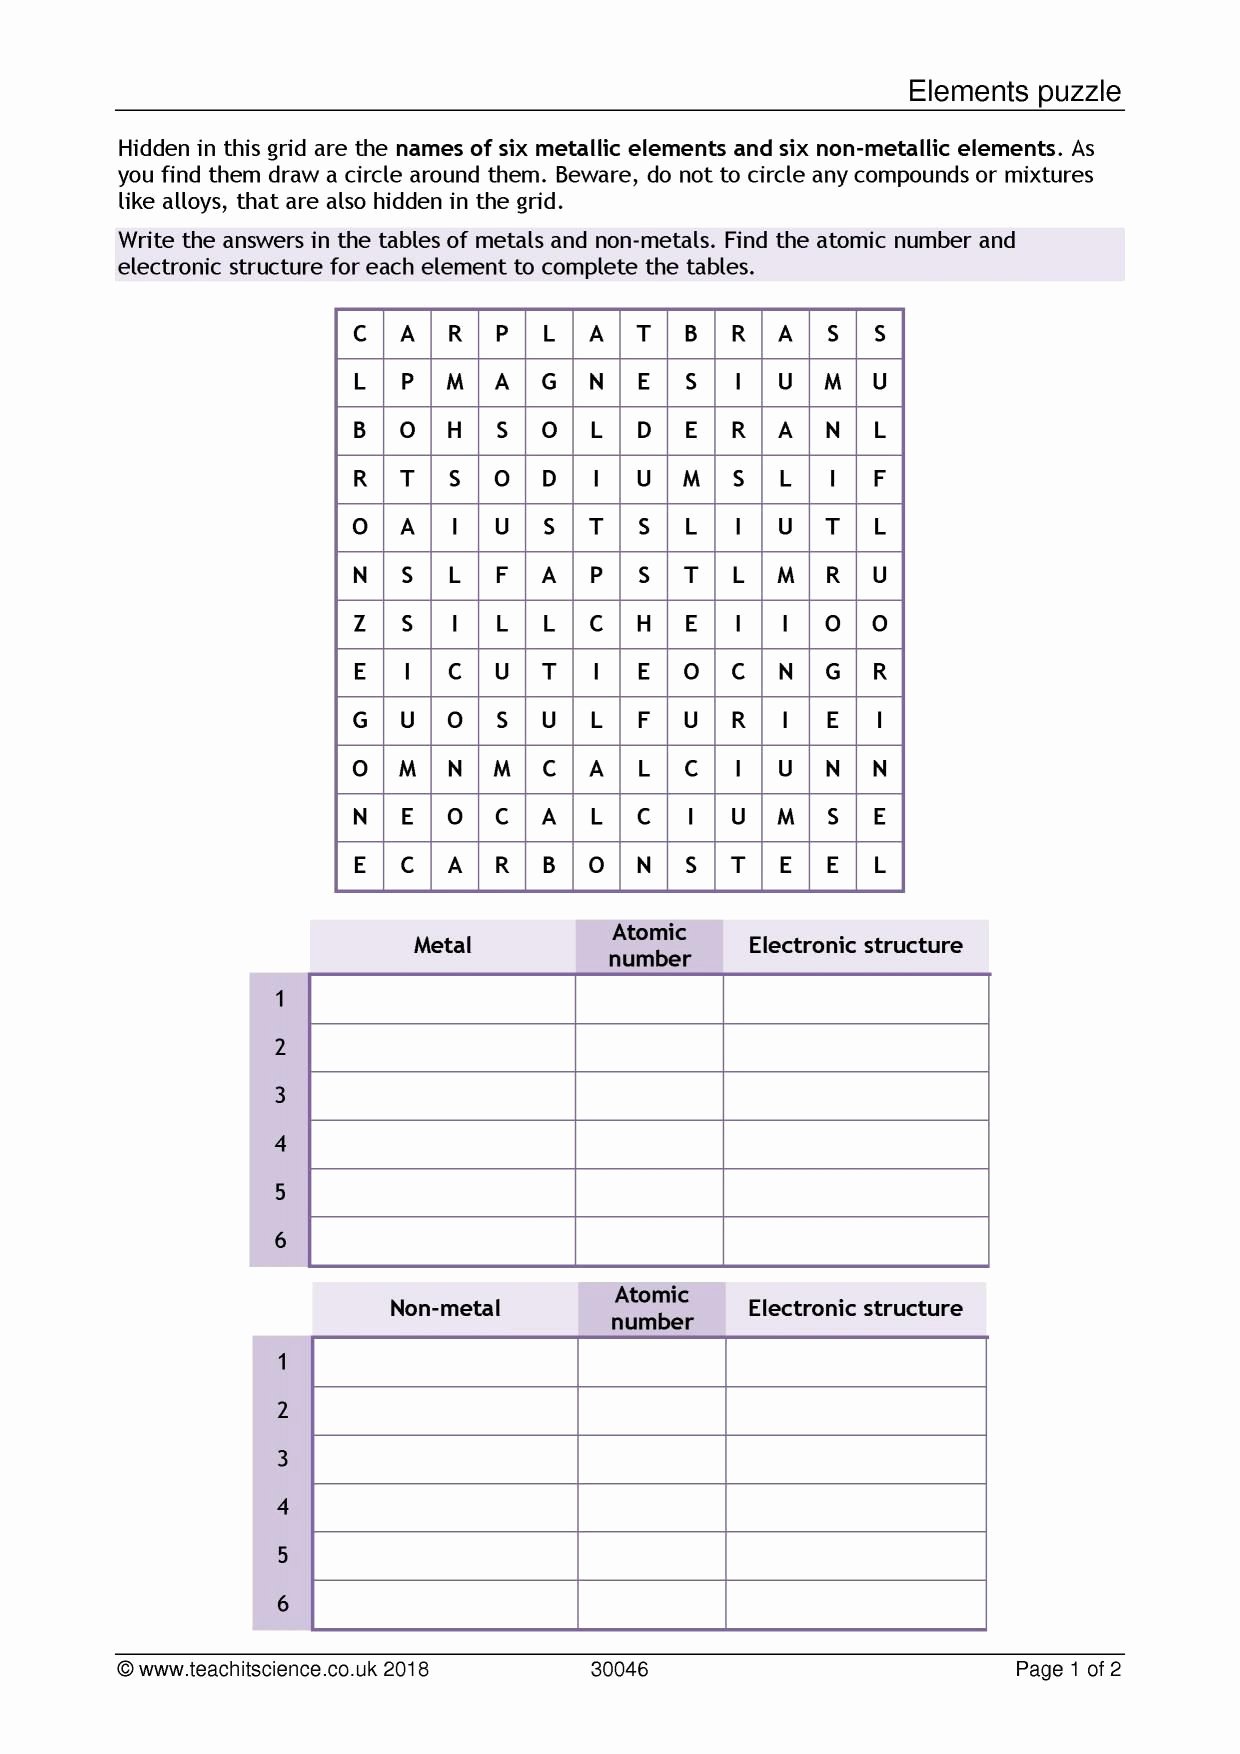 Friction and Gravity Worksheet New Friction and Gravity Lesson Quiz Worksheet